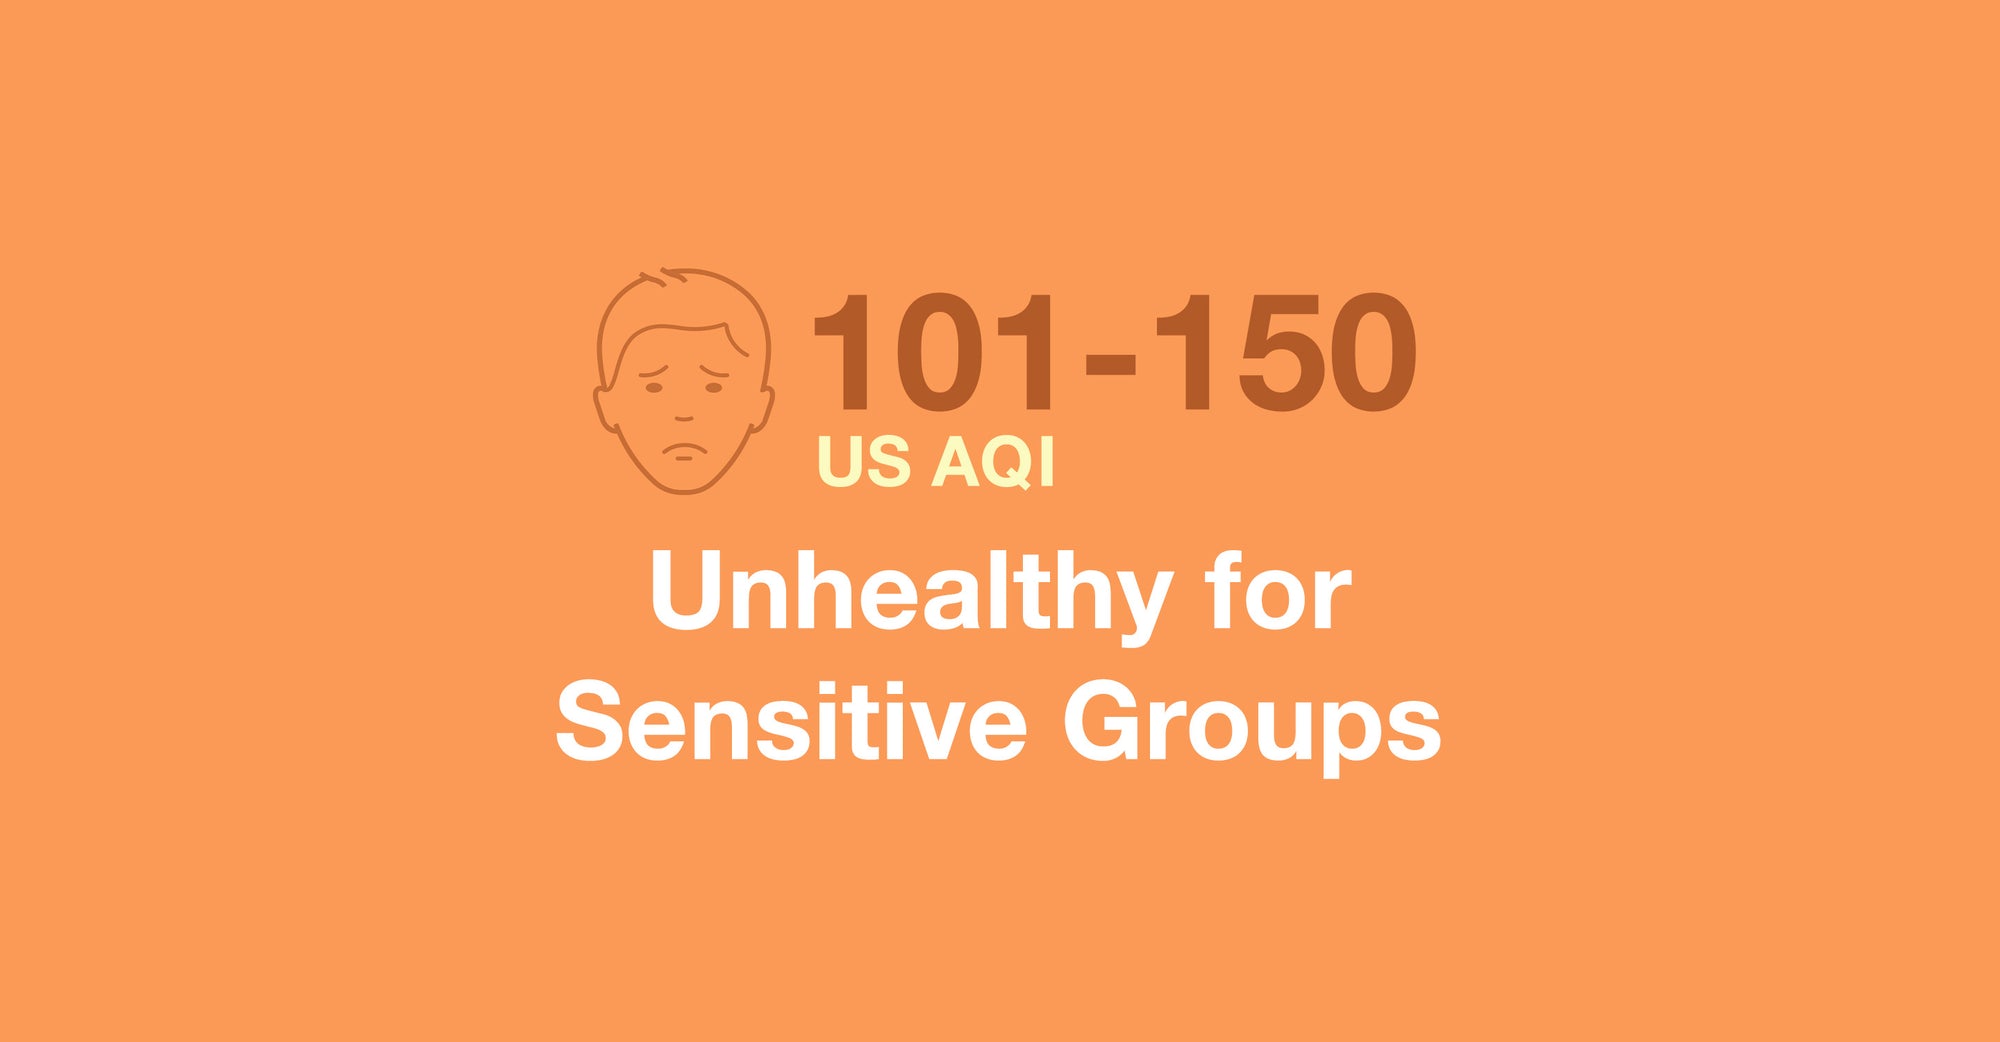 When air quality is "Unhealthy for Sensitive Groups"